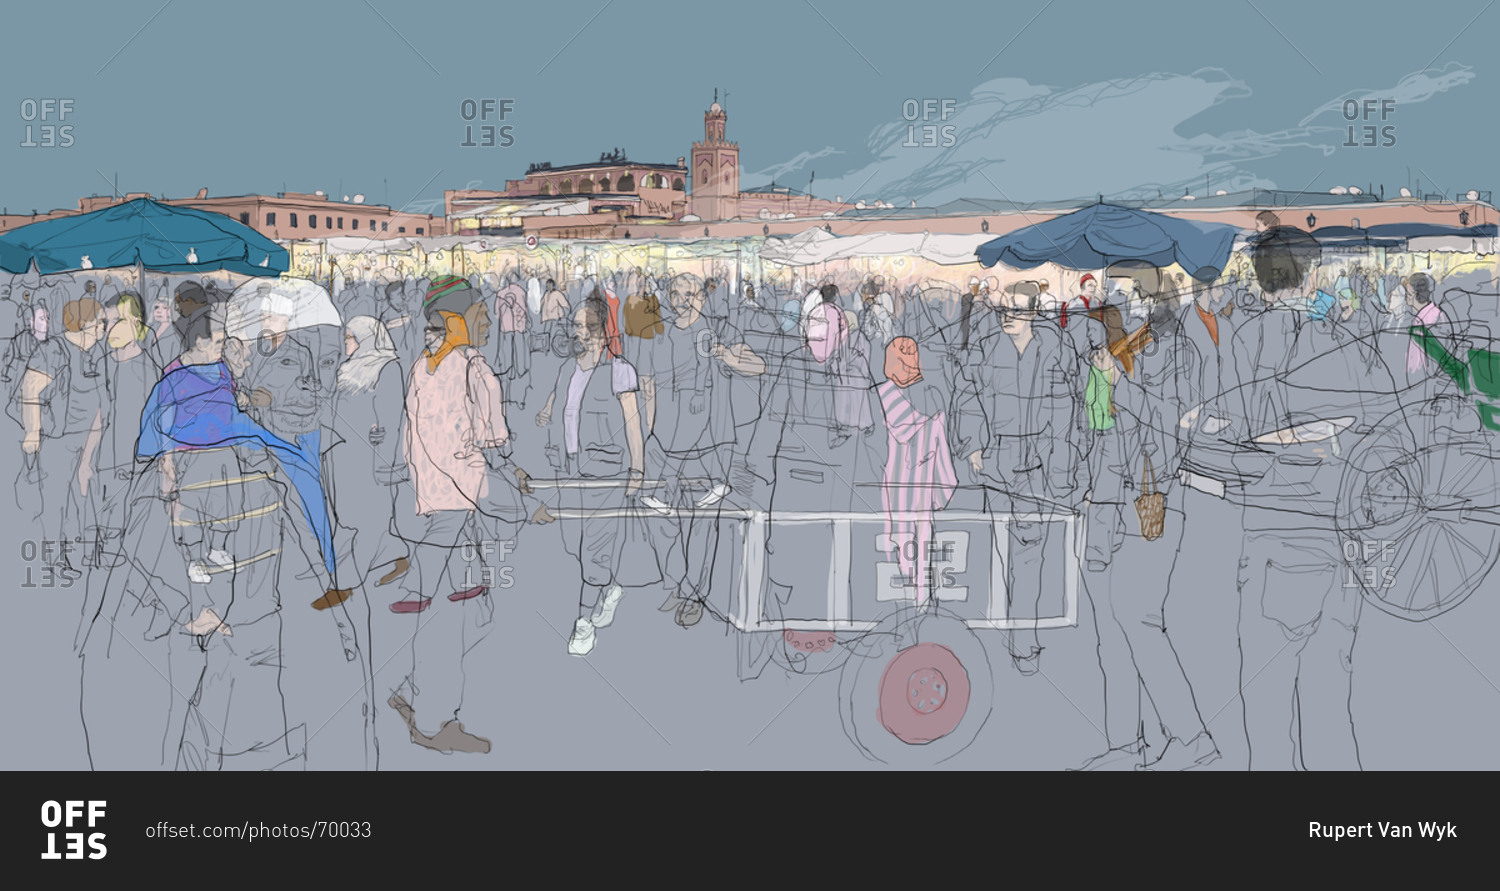 Crowds of local people and tourists moving through Jemaa el Fna Square